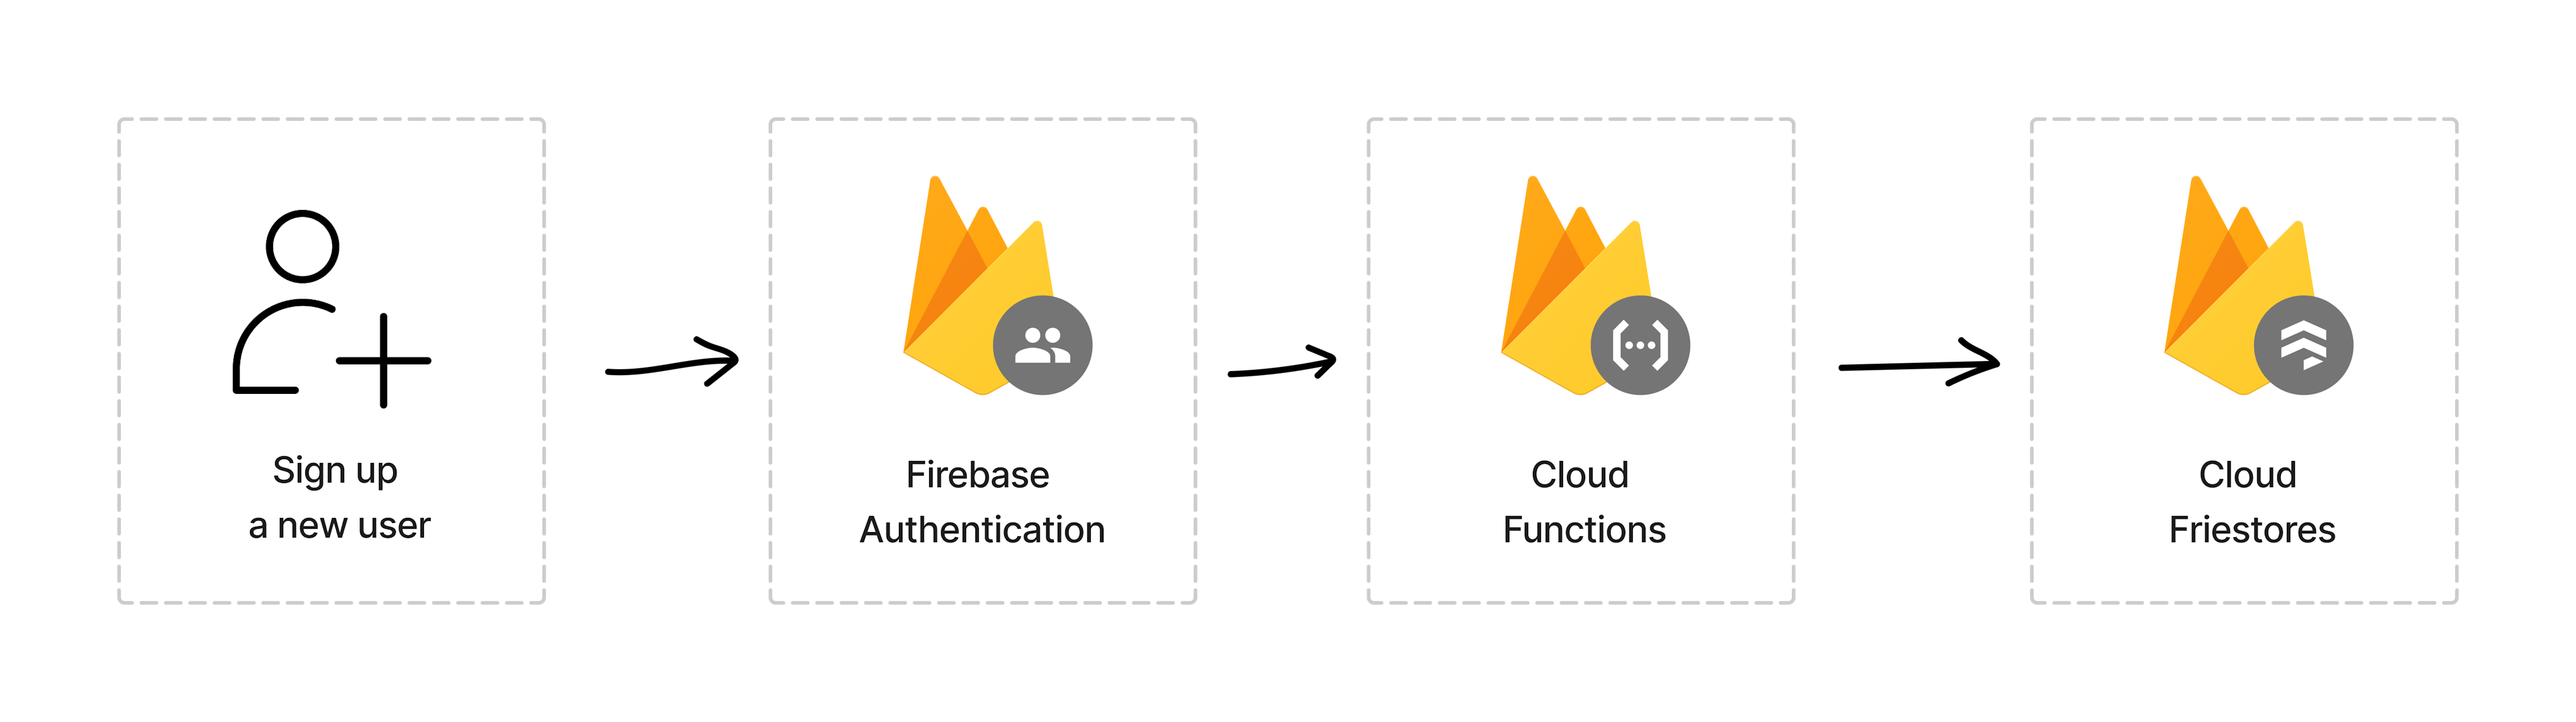 The image shows a simple flow of using firebase functions.